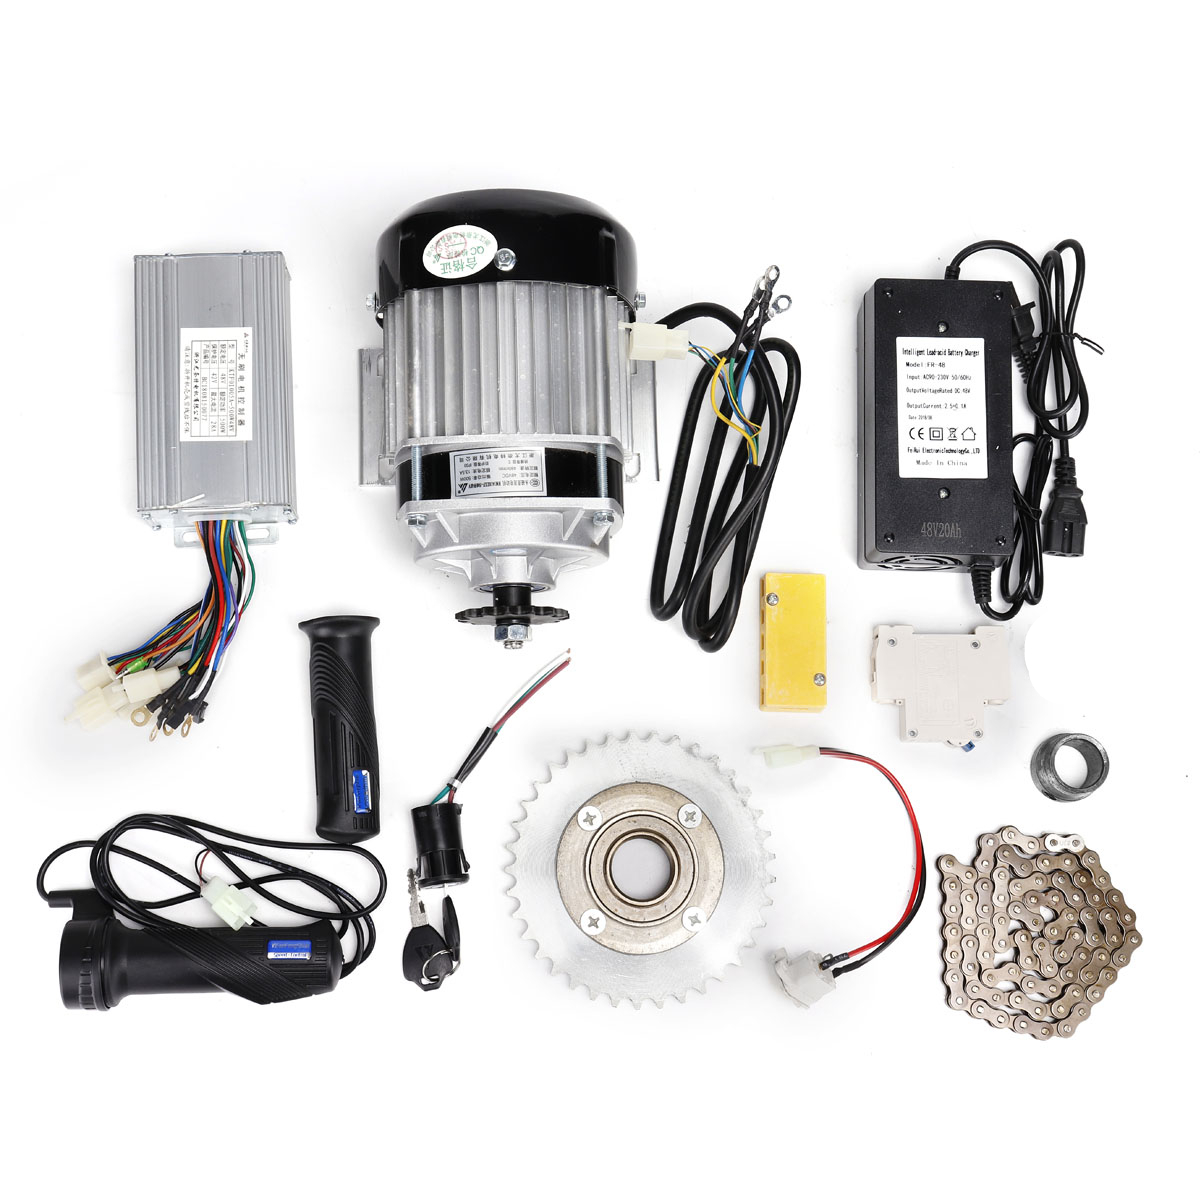 48V 500W Electric Tricycle Scooter Brushless Motor Controller Flywheel Chain Conversion Kit - Auto GoShop